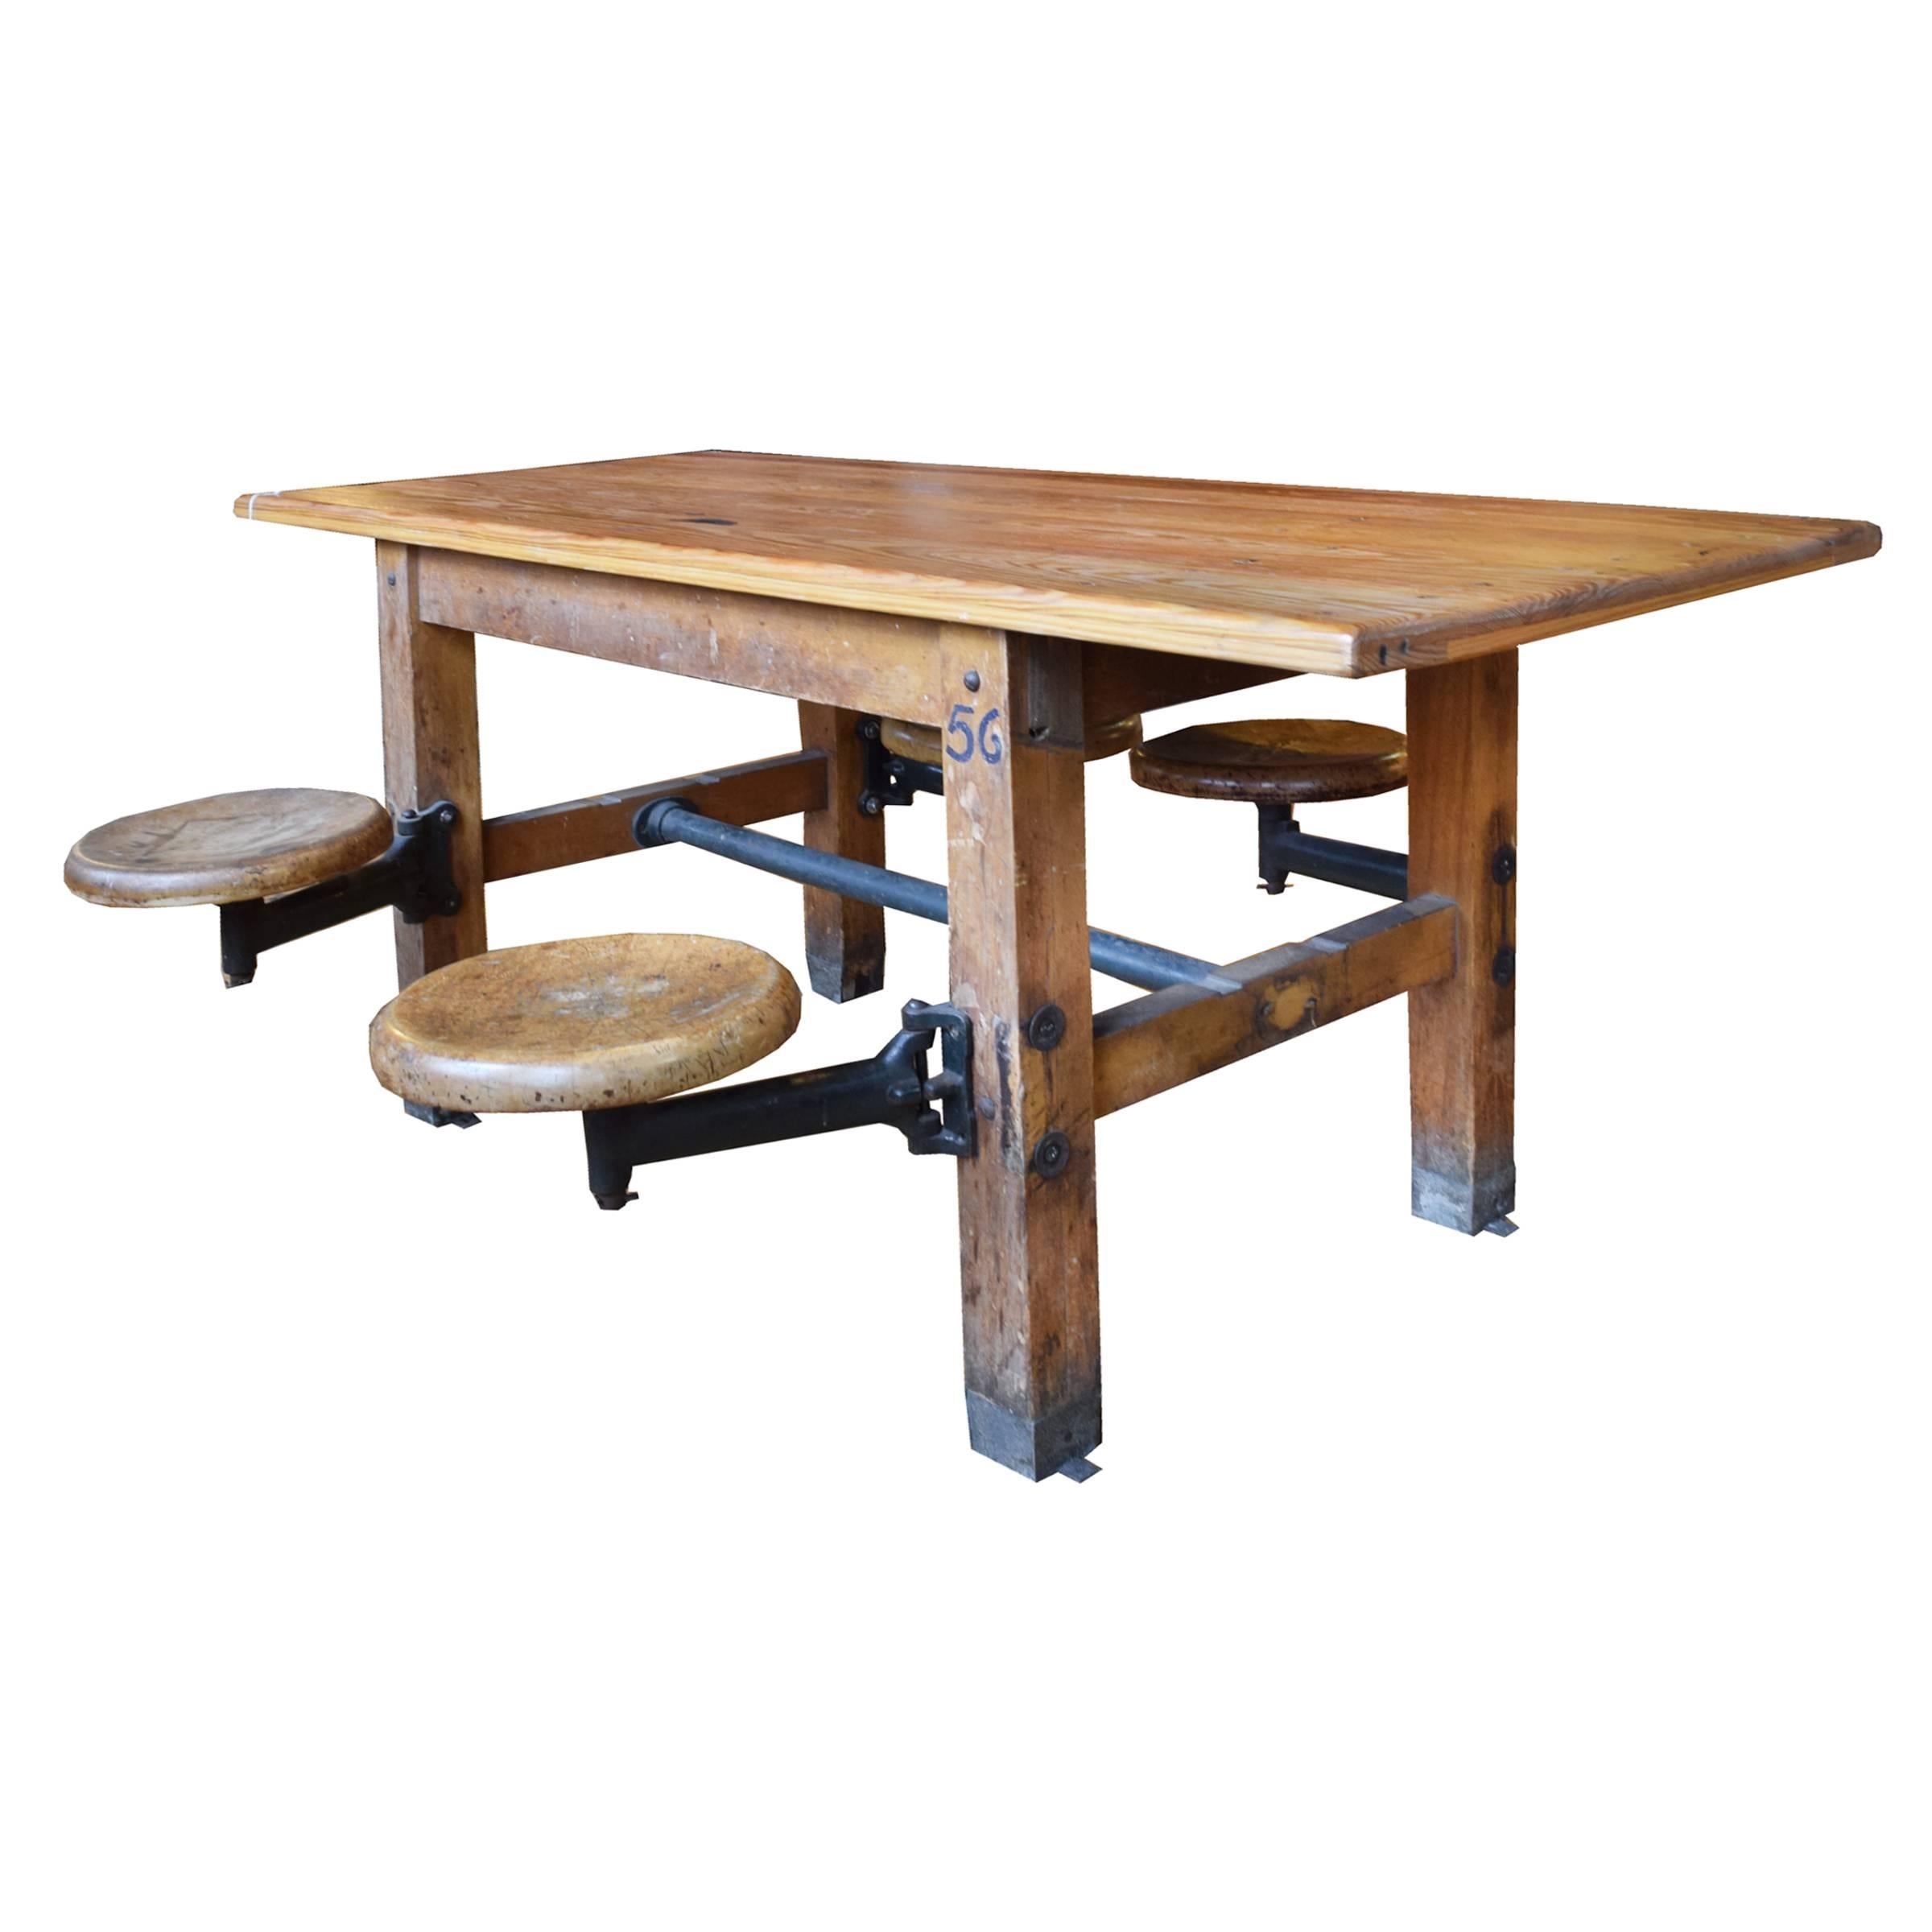 A fun American wood table with stretchers and four swing out seats, circa 1930. Table can be attached to the floor to prevent tipping.
Seat height is 18.5 inches.